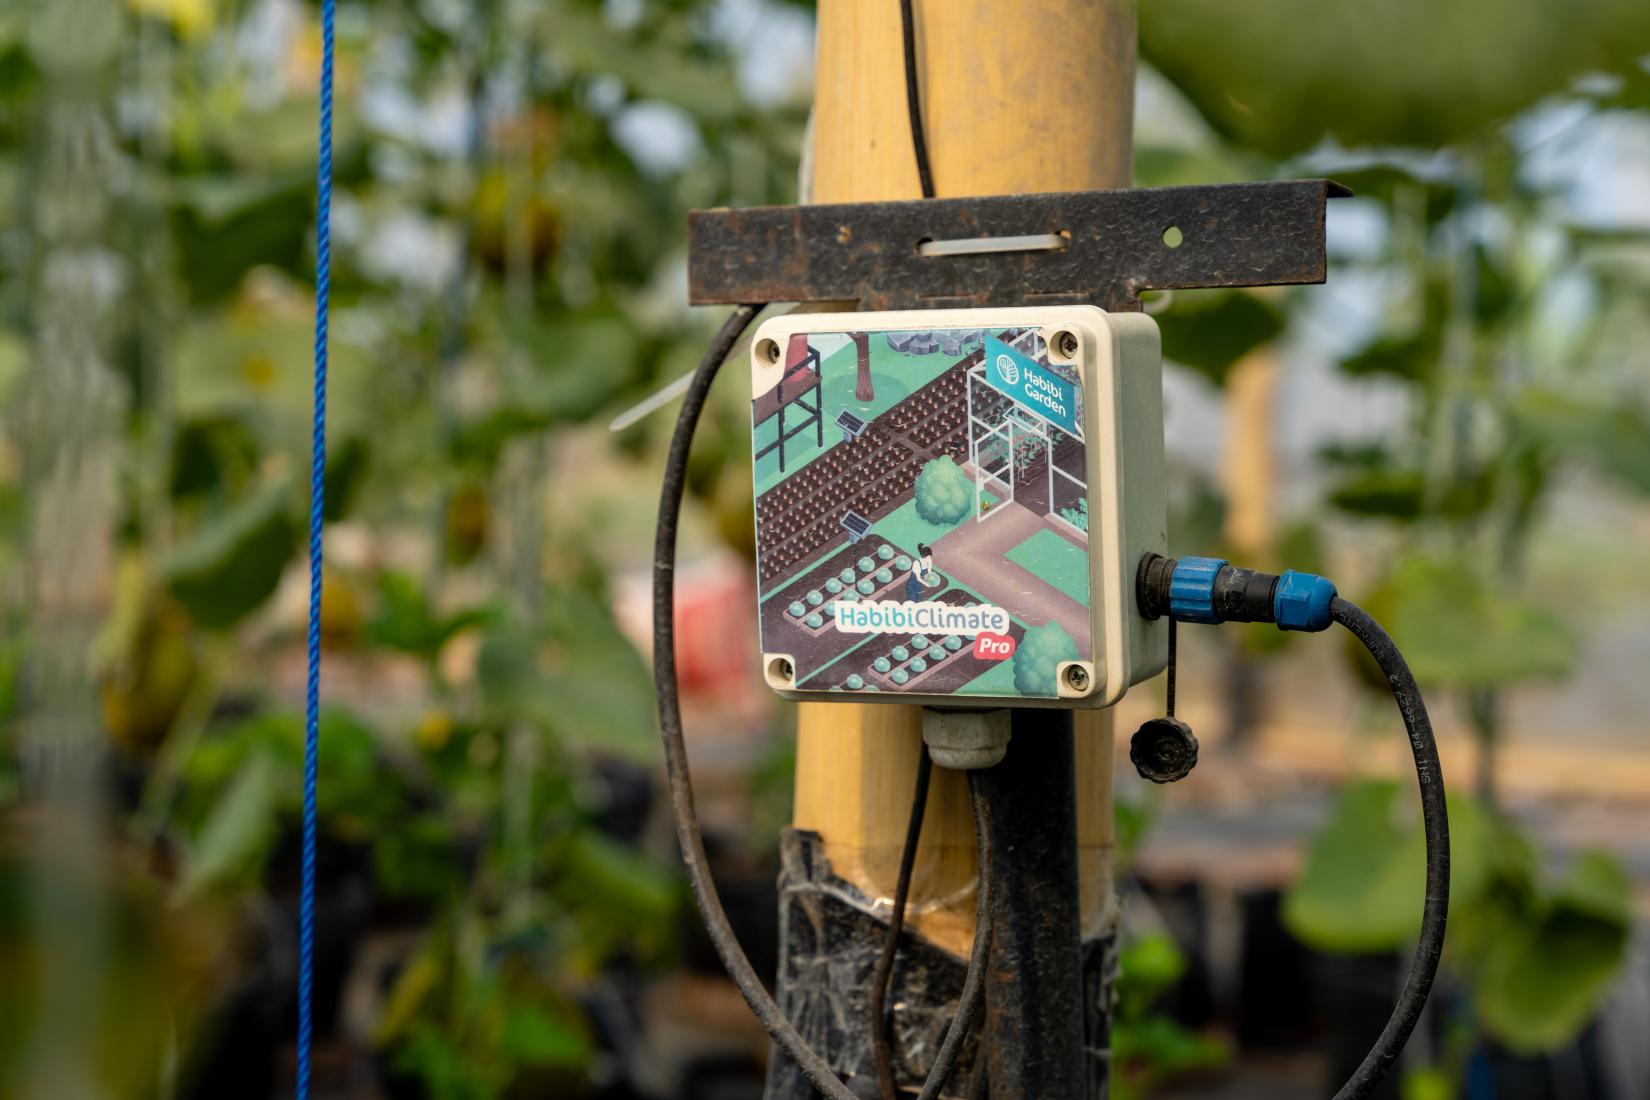 A device used for smart agriculture